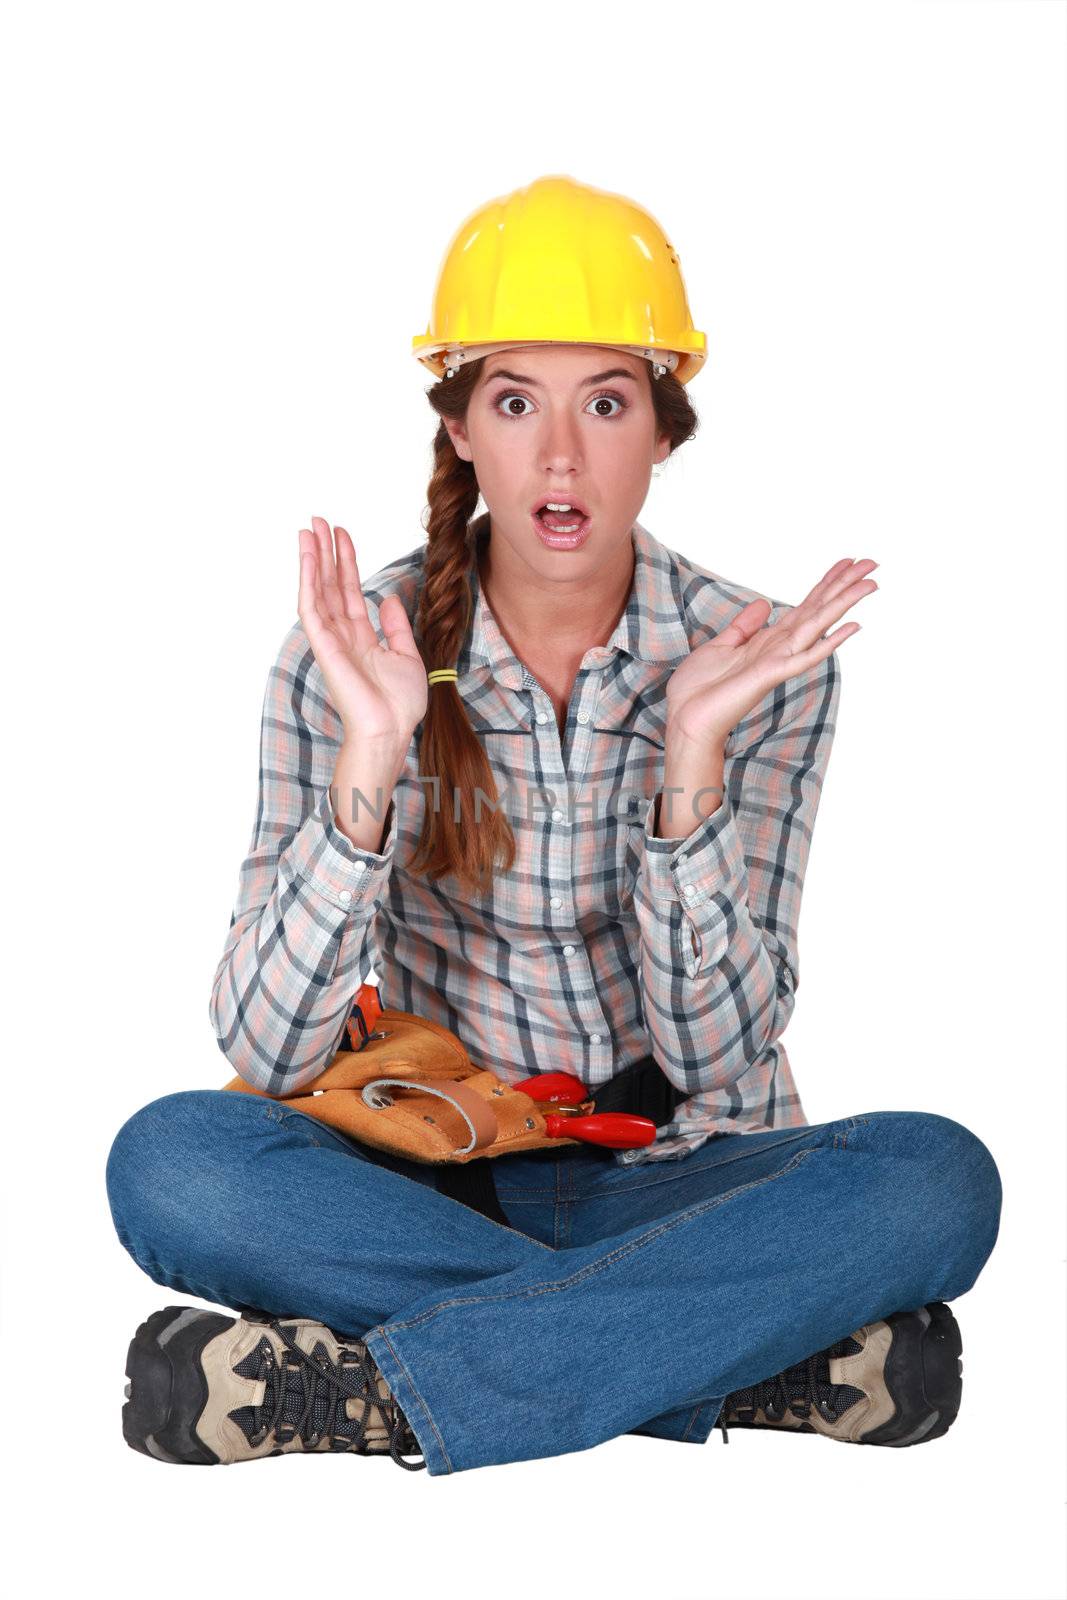 A clueless female construction worker. by phovoir